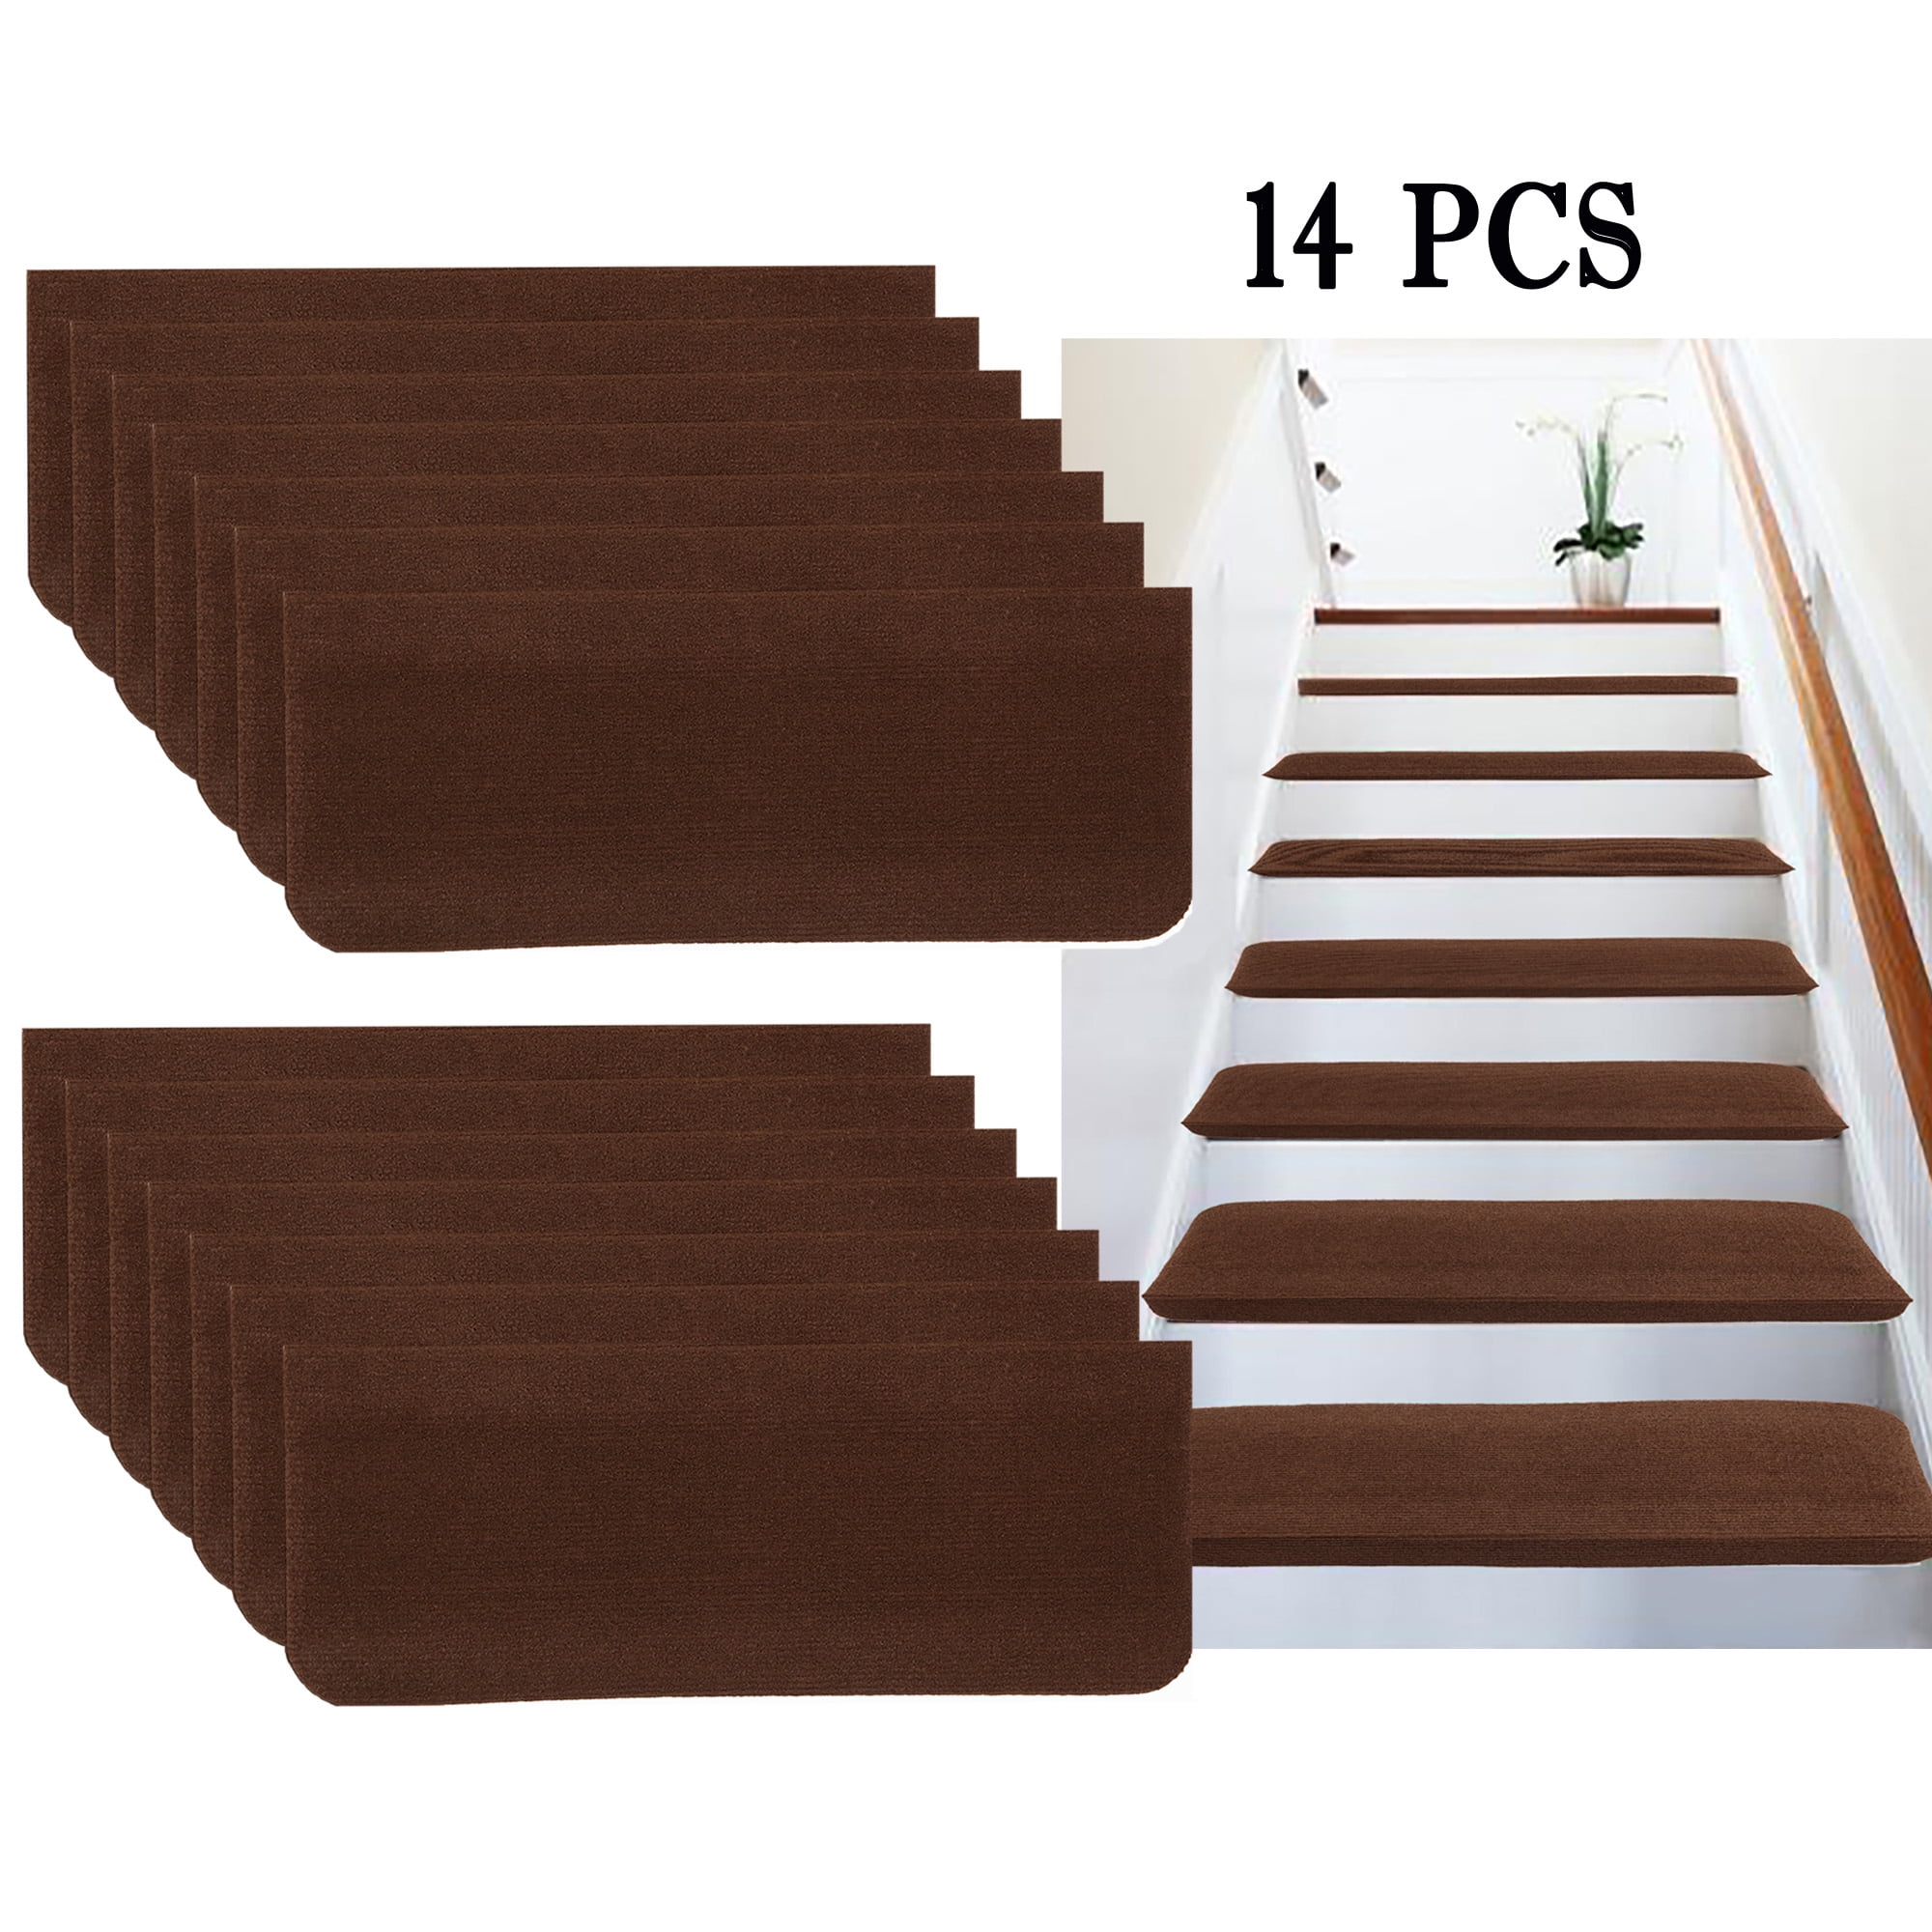 14PCS Stair Tread Carpet Mats Step Non-Slip Staircase Protection Cover Pads Home 